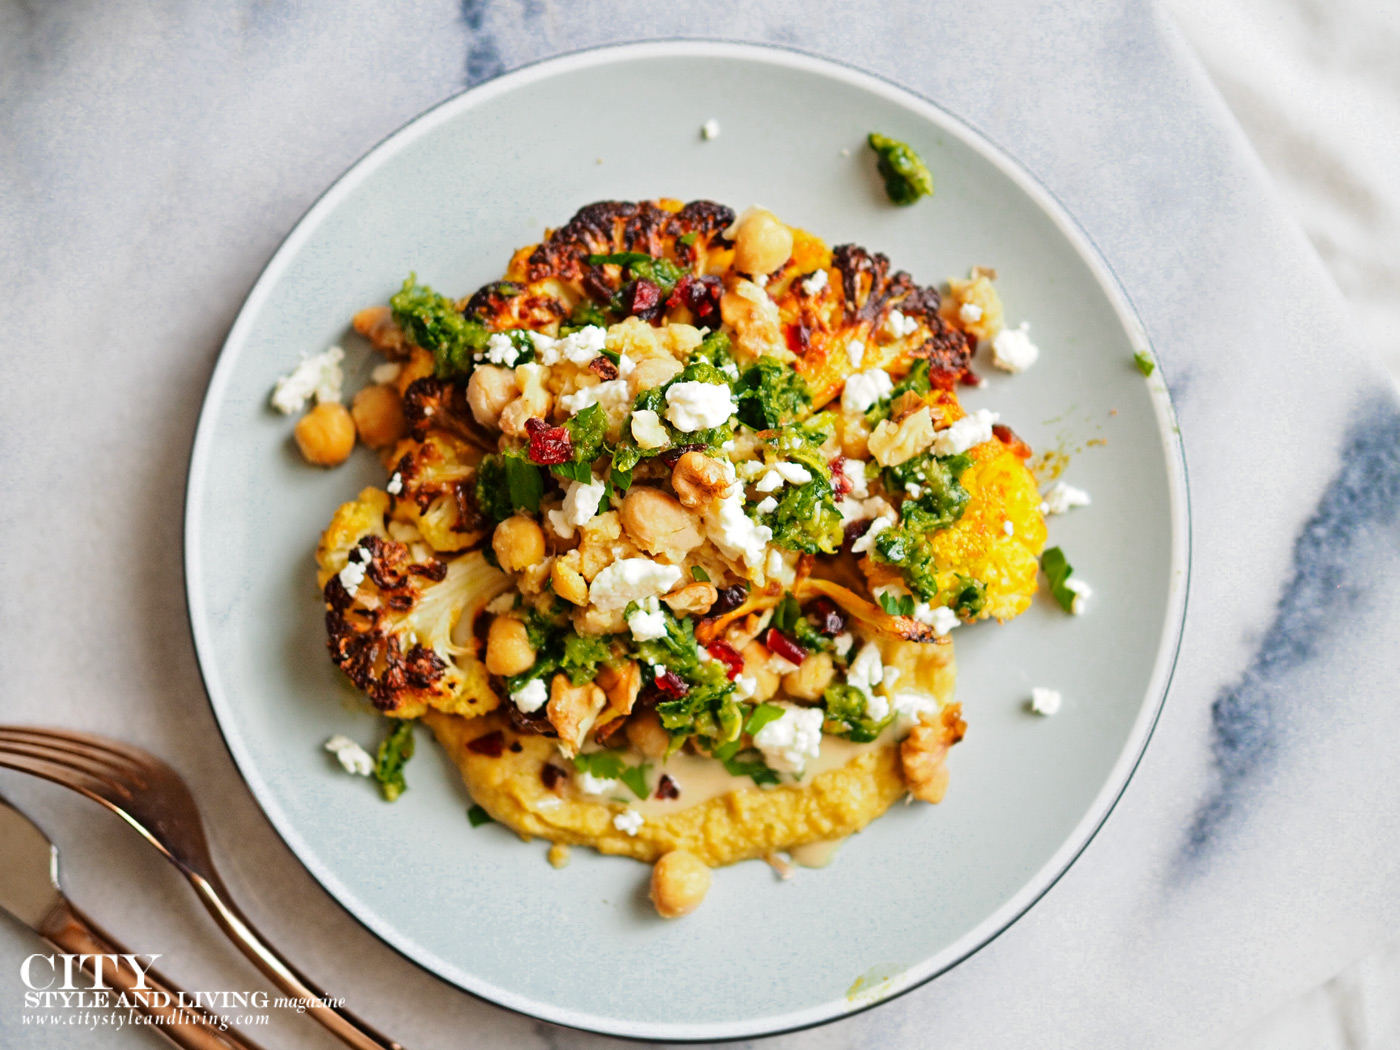 City Style and Living Fall 2021 Roasted Cauliflower Steak with Pesto, Chickpeas, Feta and Hummus